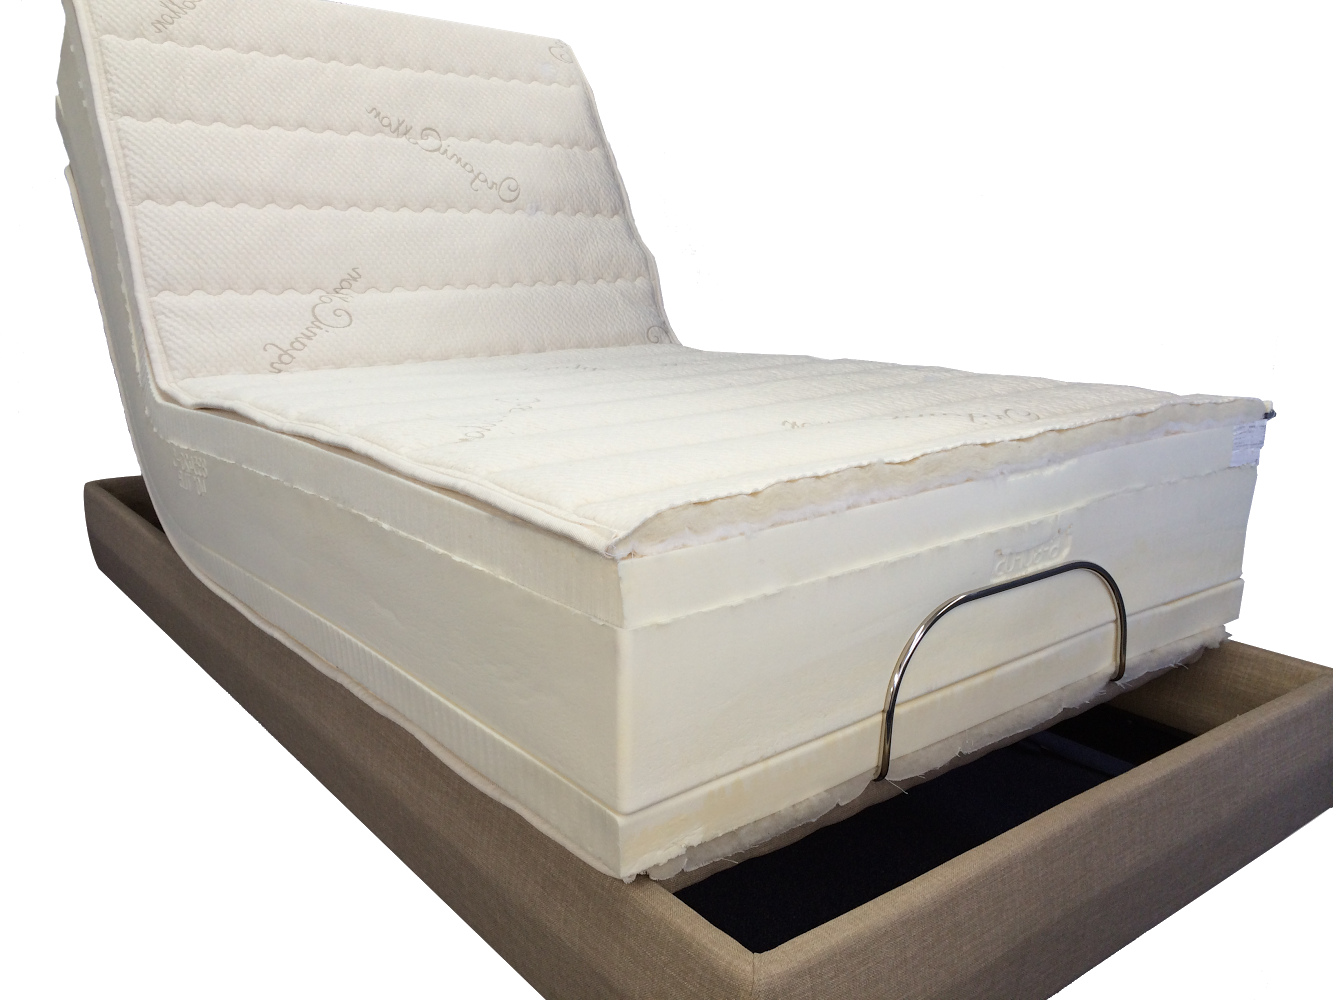 Bakersfield CA best quality highest ratings Adjustable-Beds reviews consumer reports electric adjustablebeds